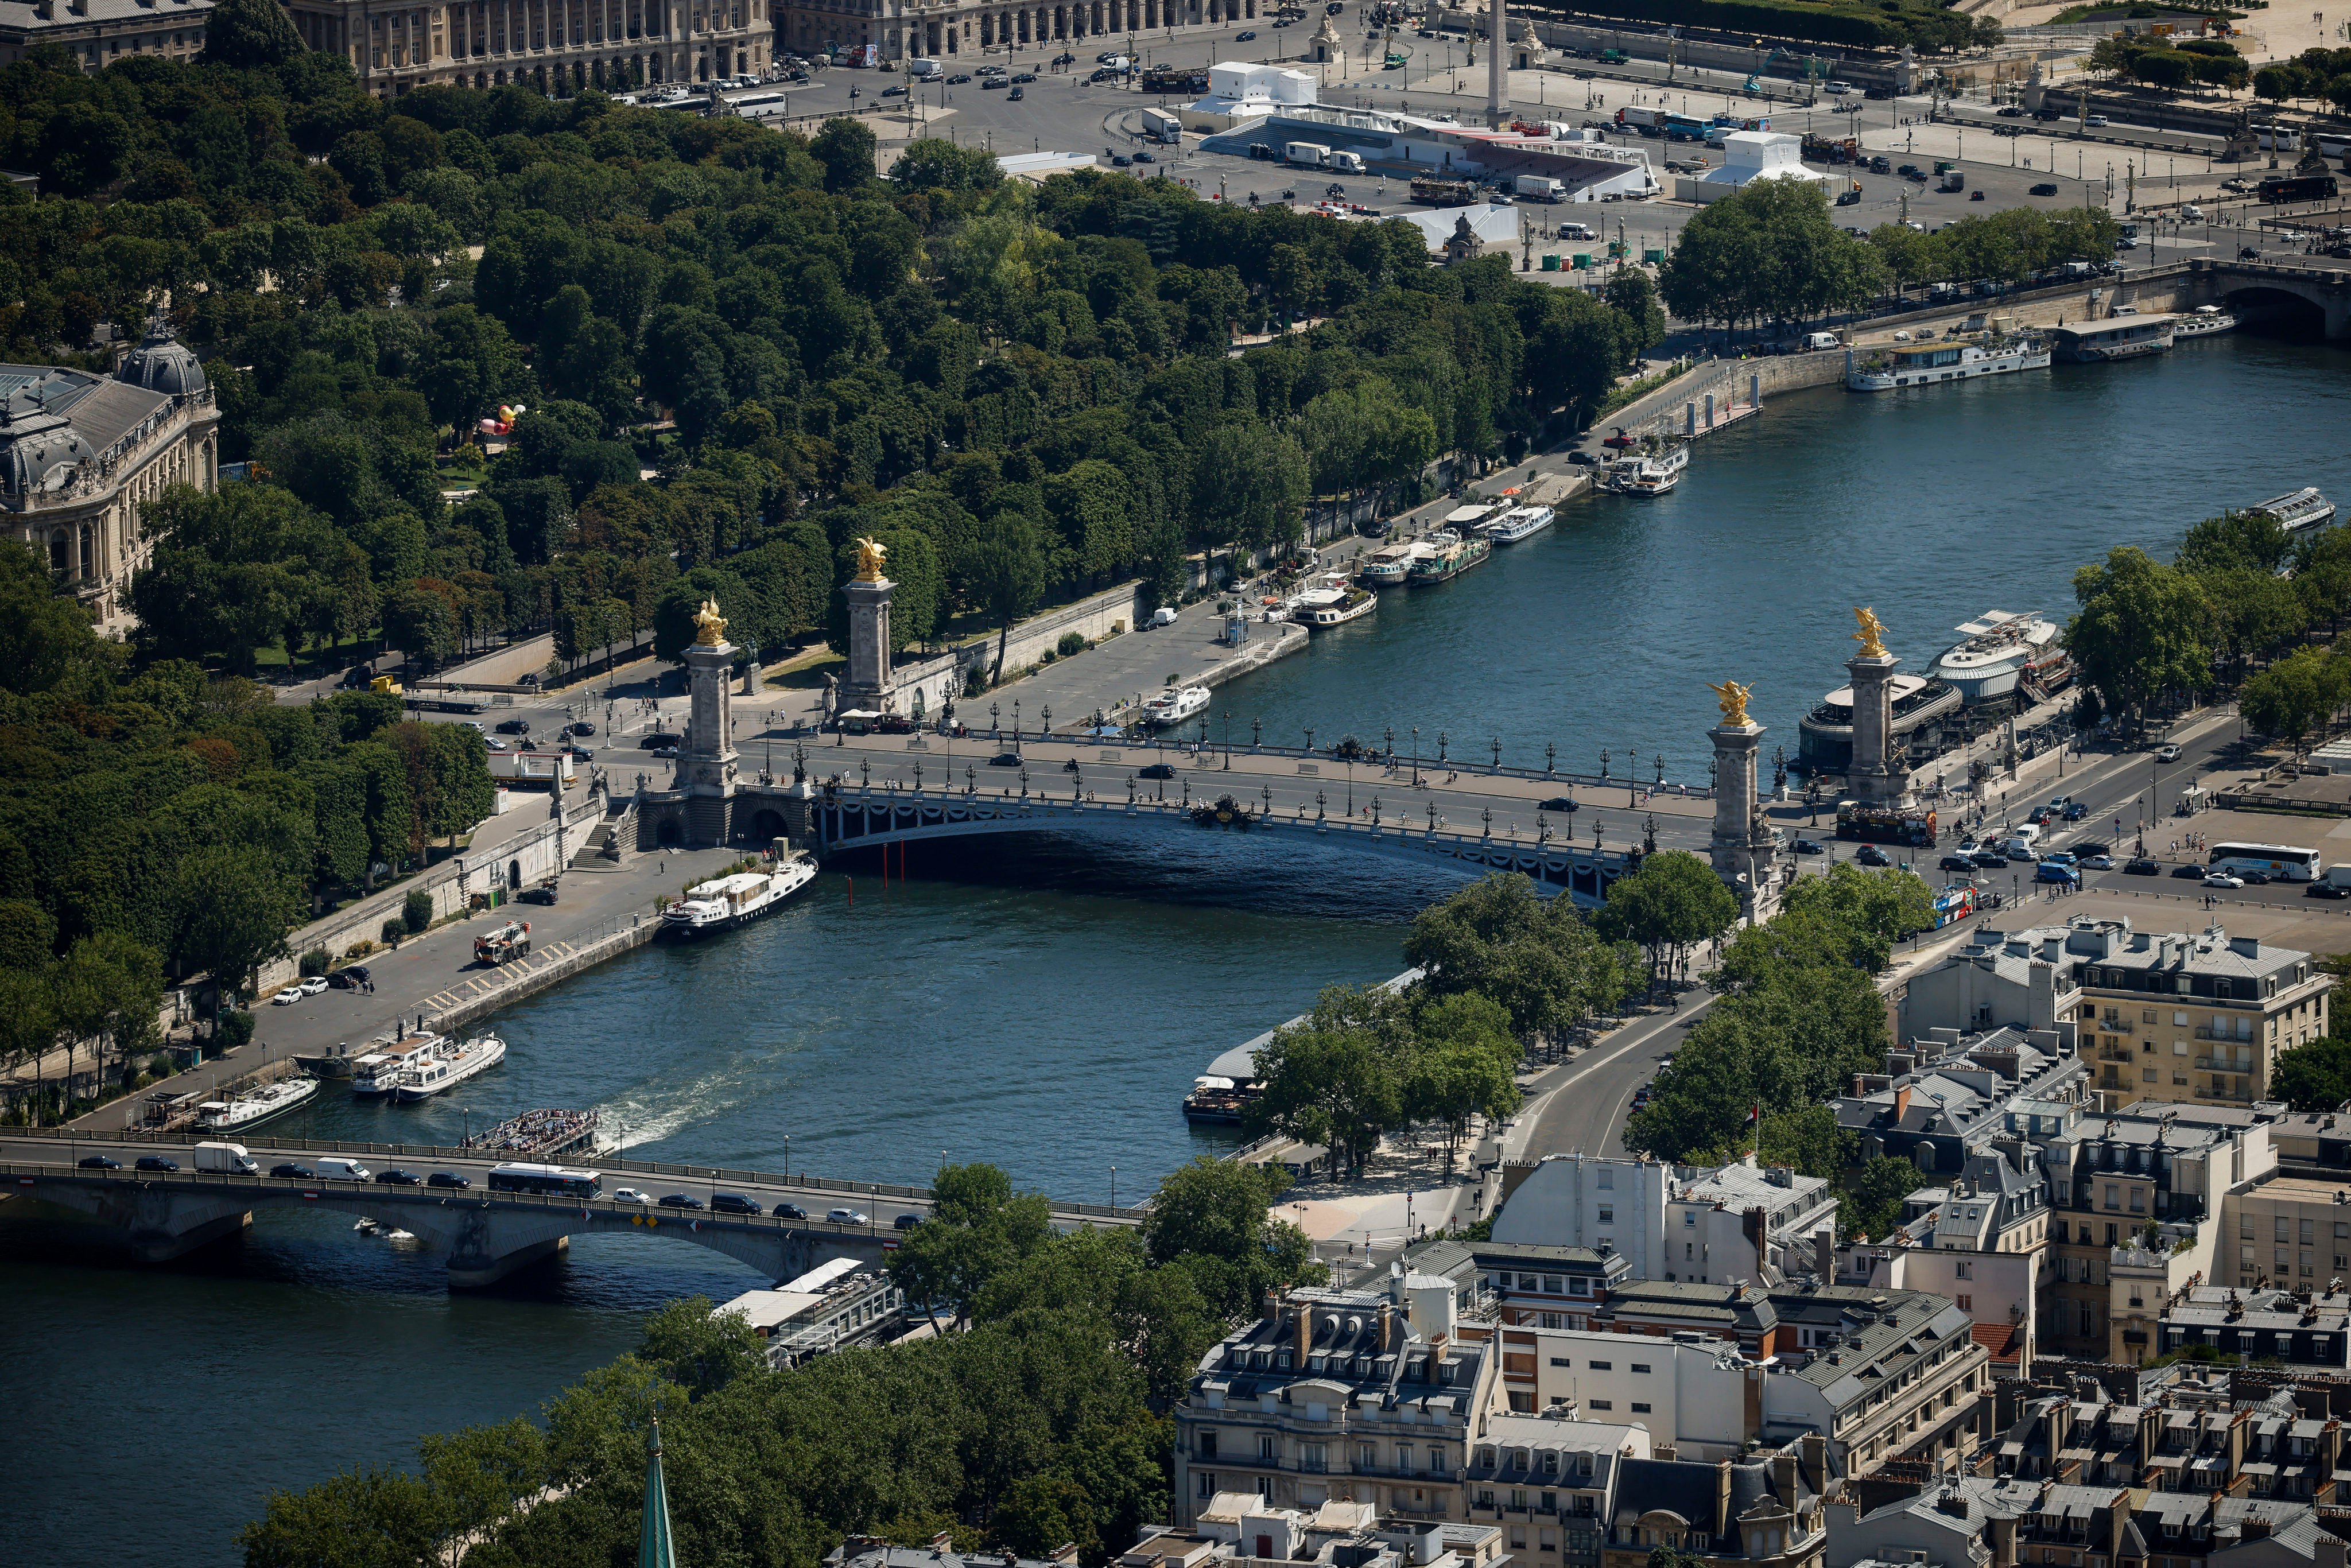 Water in the Seine River in Paris has unsafe elevated levels of E. coli less than two months before swimming competitions are scheduled to take place in it during the Olympics. Photo: AP